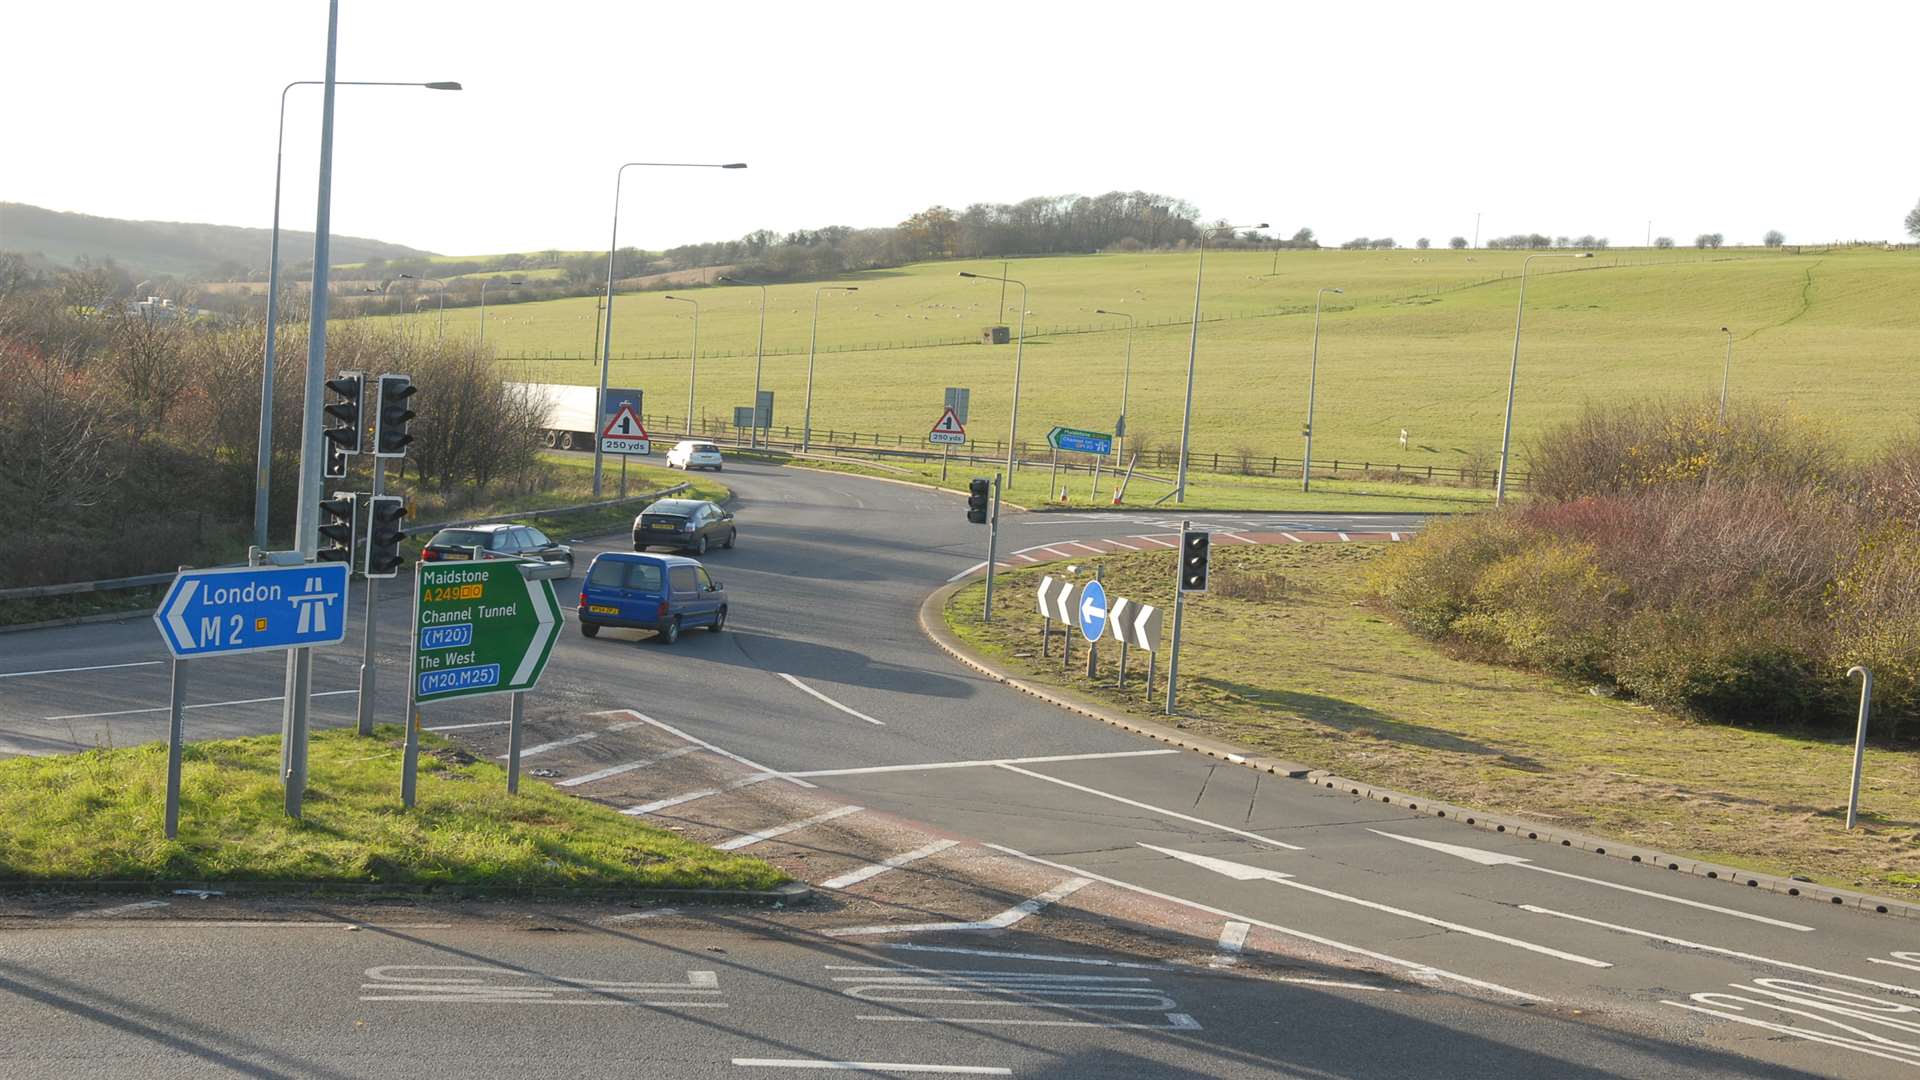 The accident happened on the A249 near the Stockbury Roundabout. File image